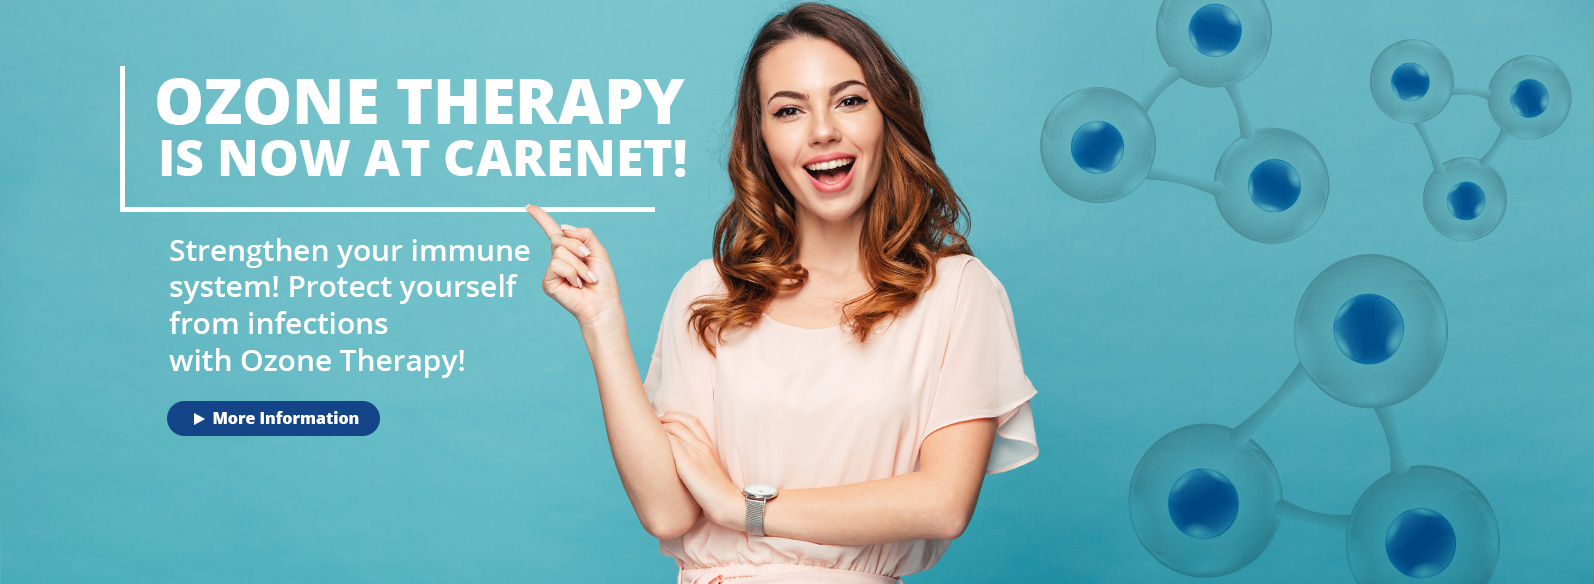 Ozone therapy is now available at Carenet